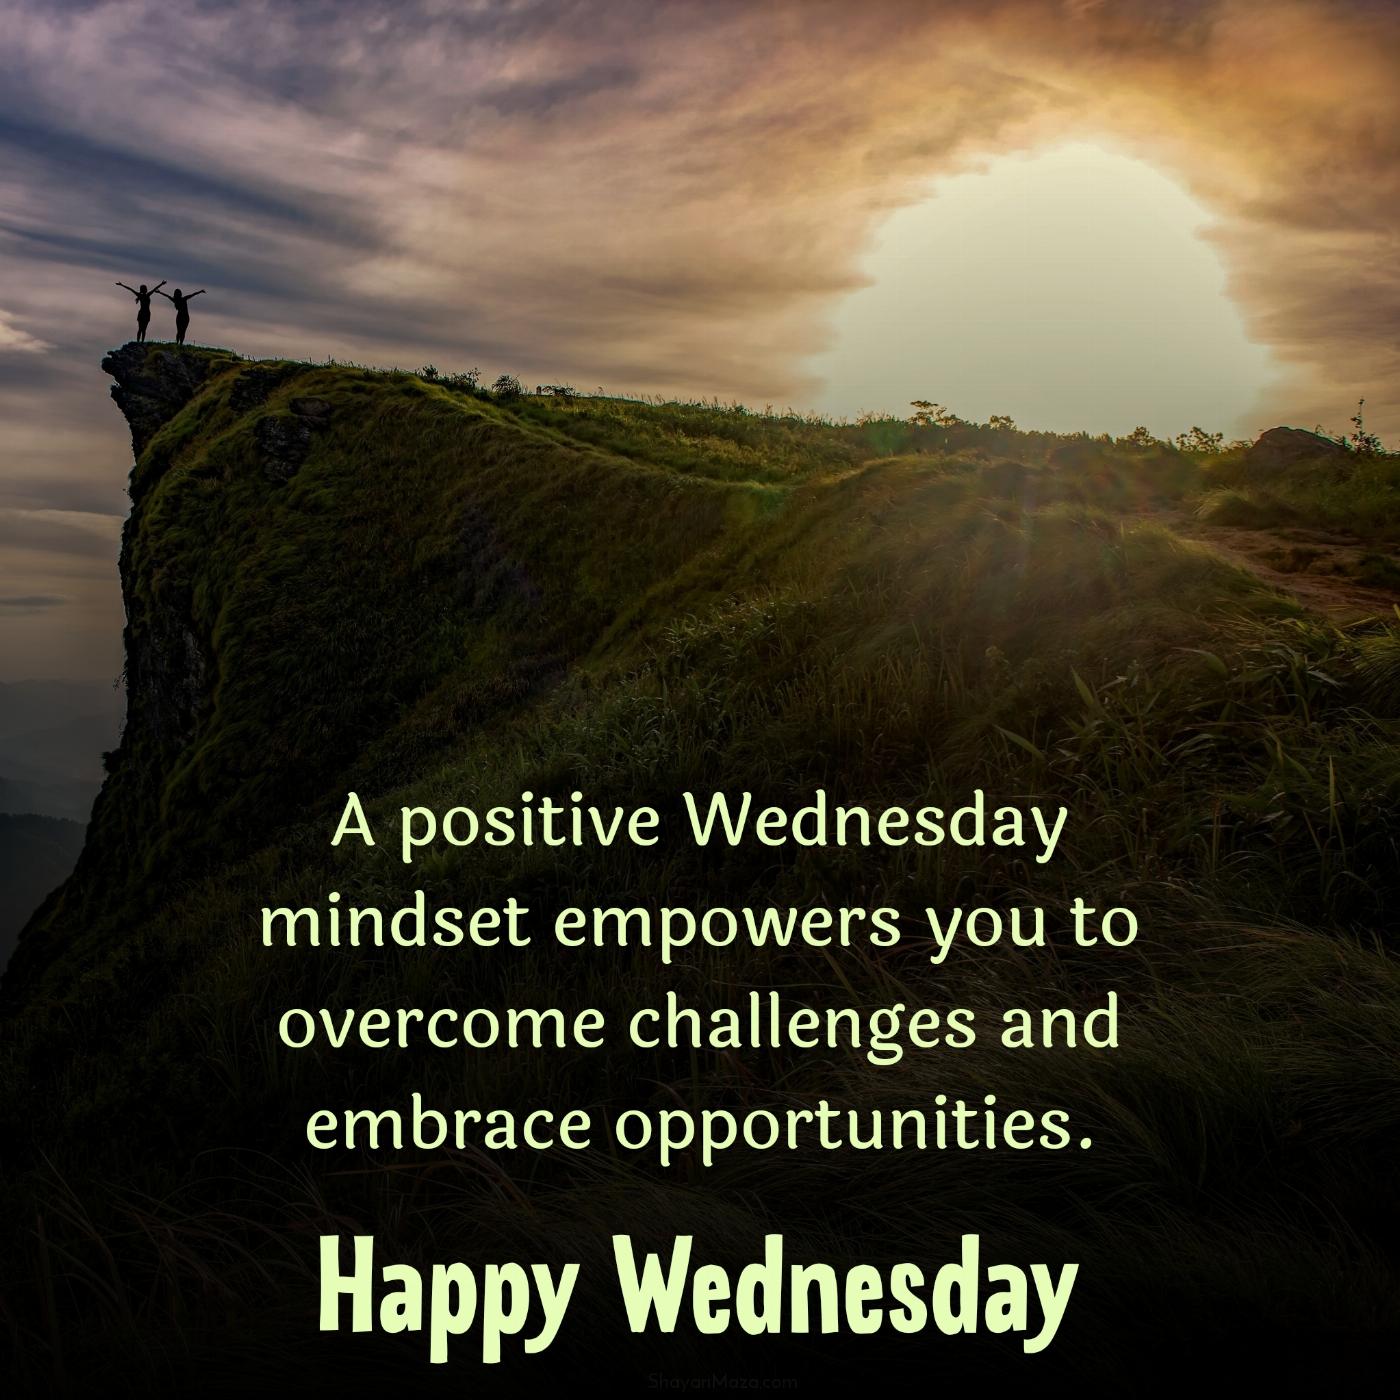 A positive Wednesday mindset empowers you to overcome